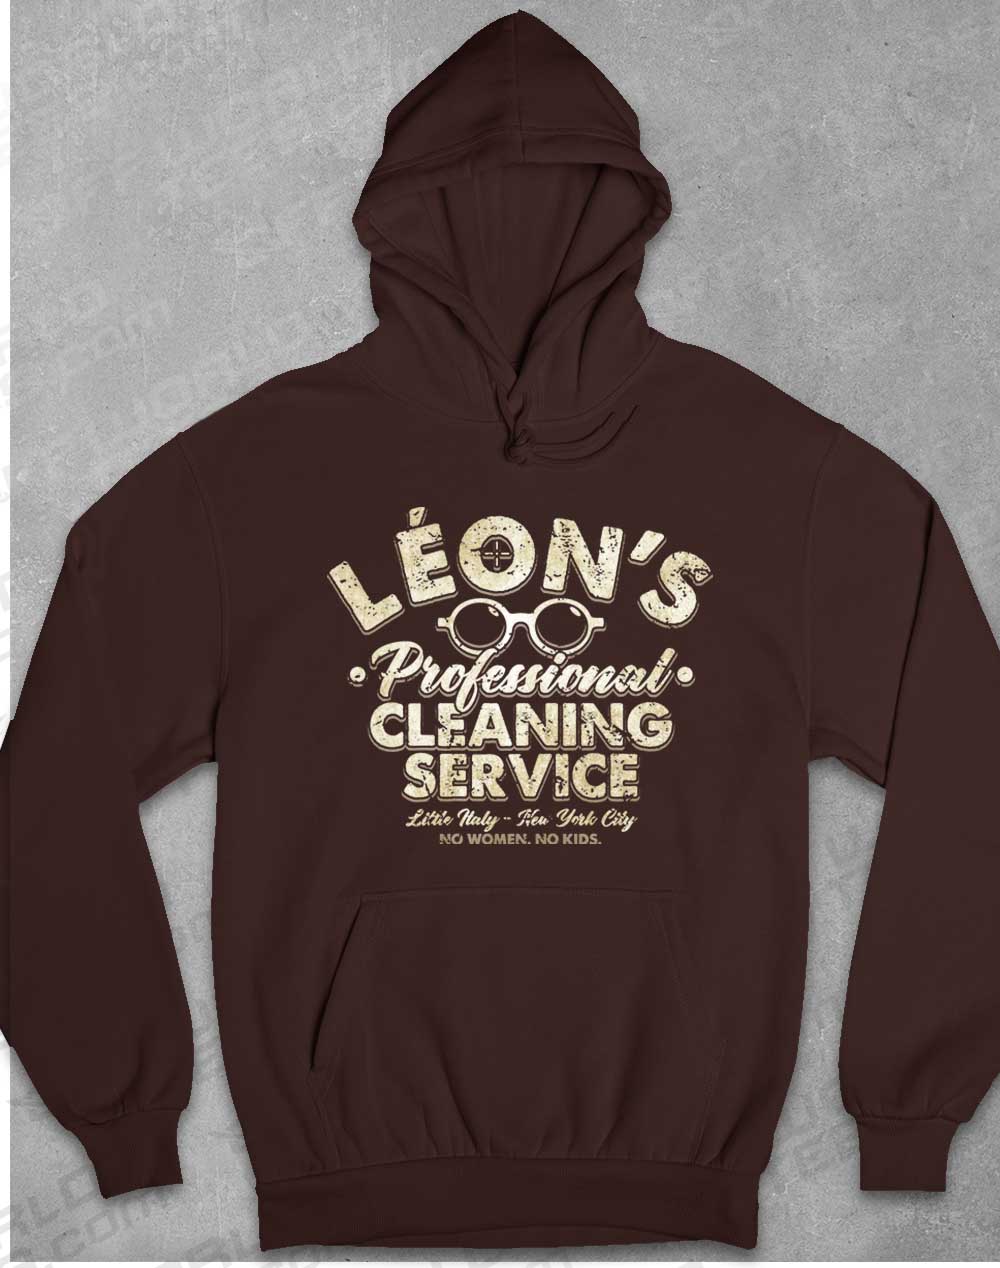 Hot Chocolate - Leon's Professional Cleaning Hoodie